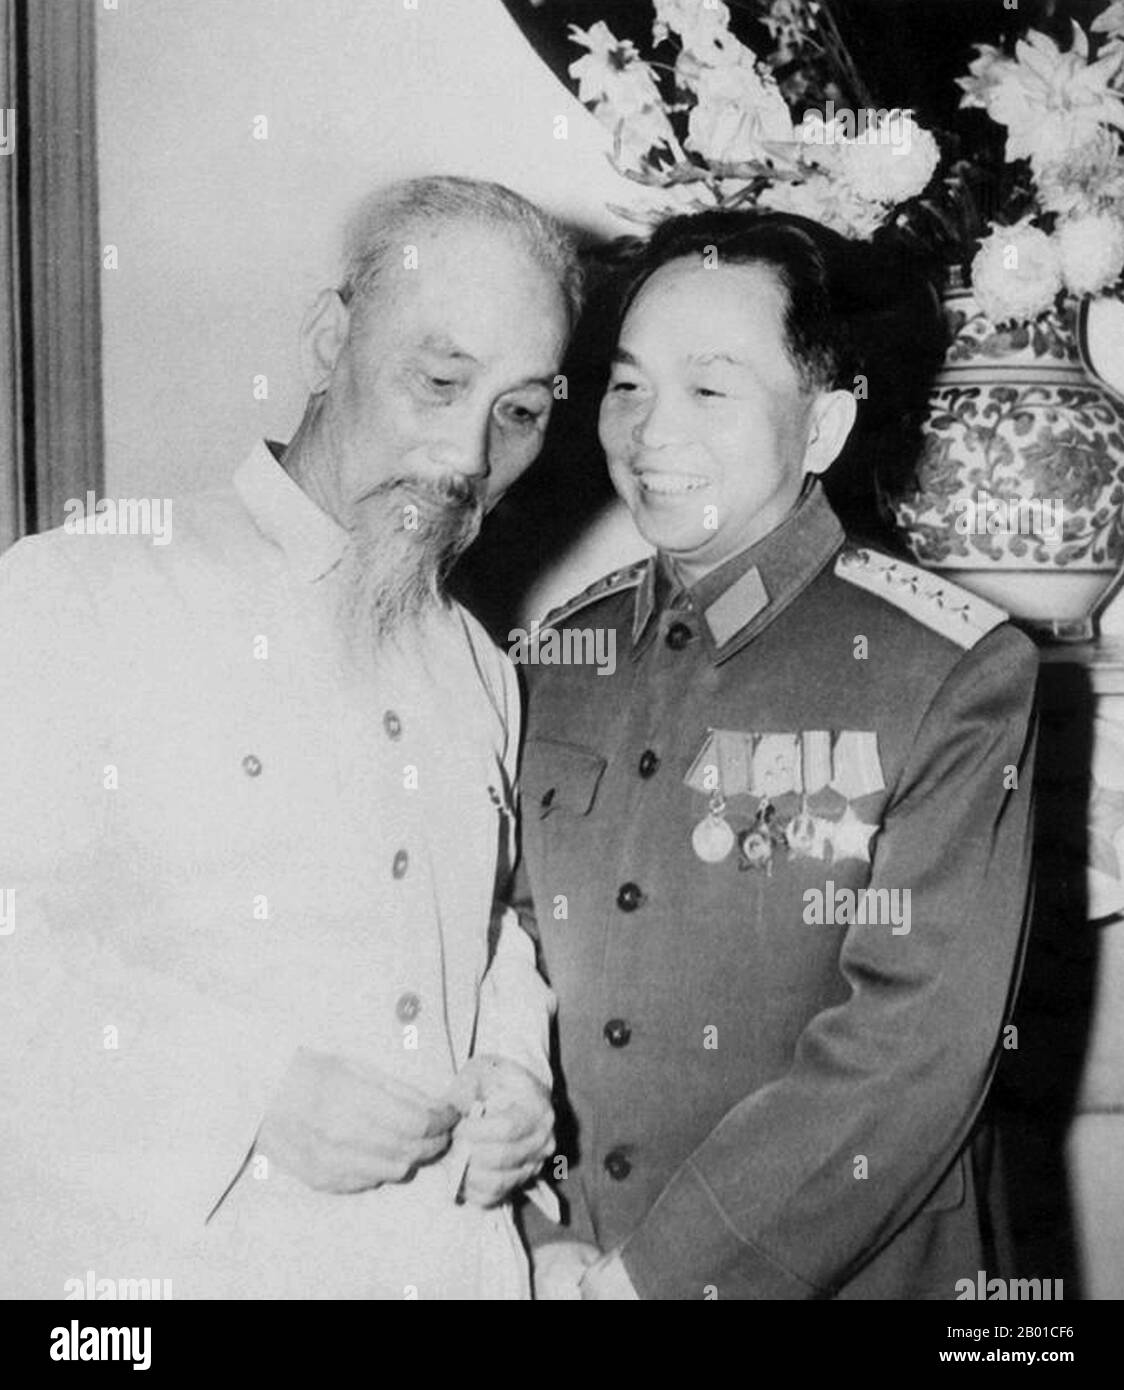 Vietnam: President Ho Chi Minh (19 May 1890 – 3 September 1969) talking with General Vo Nguyen Giap (25 August 1911 - 4 October 2013), Hanoi, 1962.  Hồ Chí Minh, born Nguyễn Sinh Cung and also known as Nguyễn Ái Quốc, was a Vietnamese Communist revolutionary leader who was prime minister (1946-1955) and president (1945-1969) of the Democratic Republic of Vietnam (North Vietnam).  Vo Nguyen Giap (Vietnamese: Võ Nguyên Giáp) was a Vietnamese officer in the Vietnam People's Army and a politician. He was a principal commander in the two Indochina Wars. Stock Photo